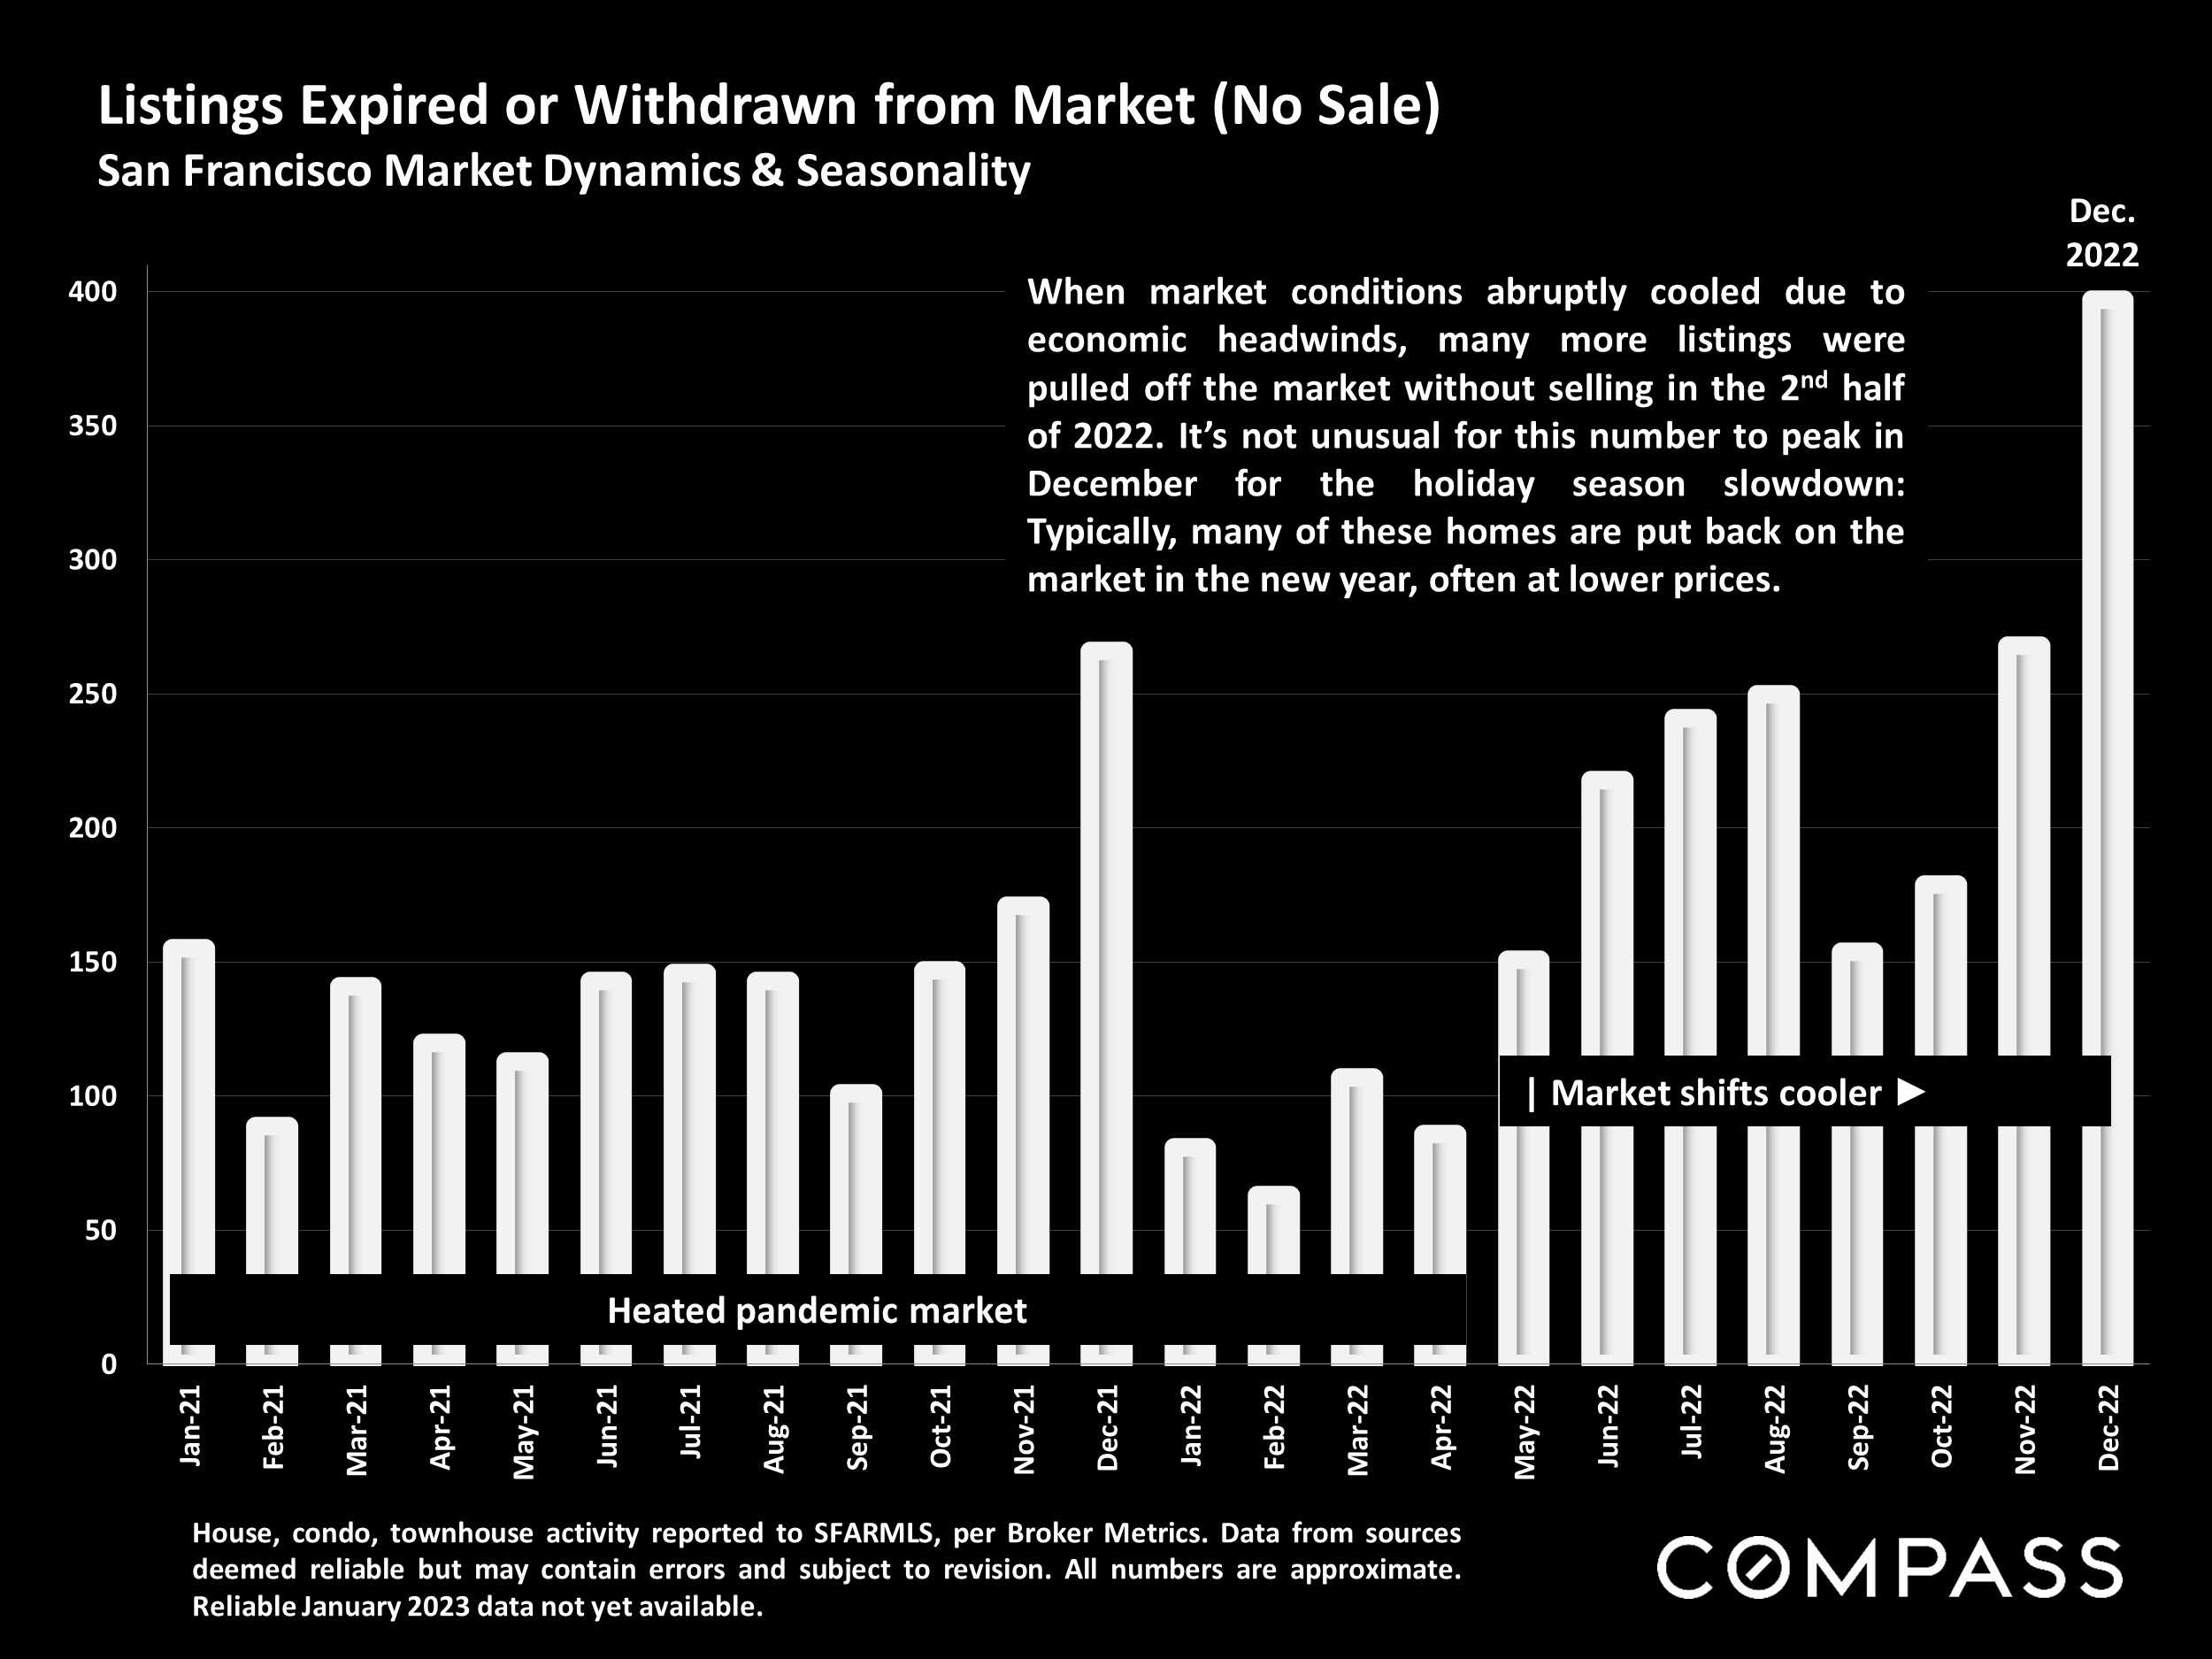 Listings Expired or Withdrawn from Market (No Sale) San Francisco Market Dynamics & Seasonality